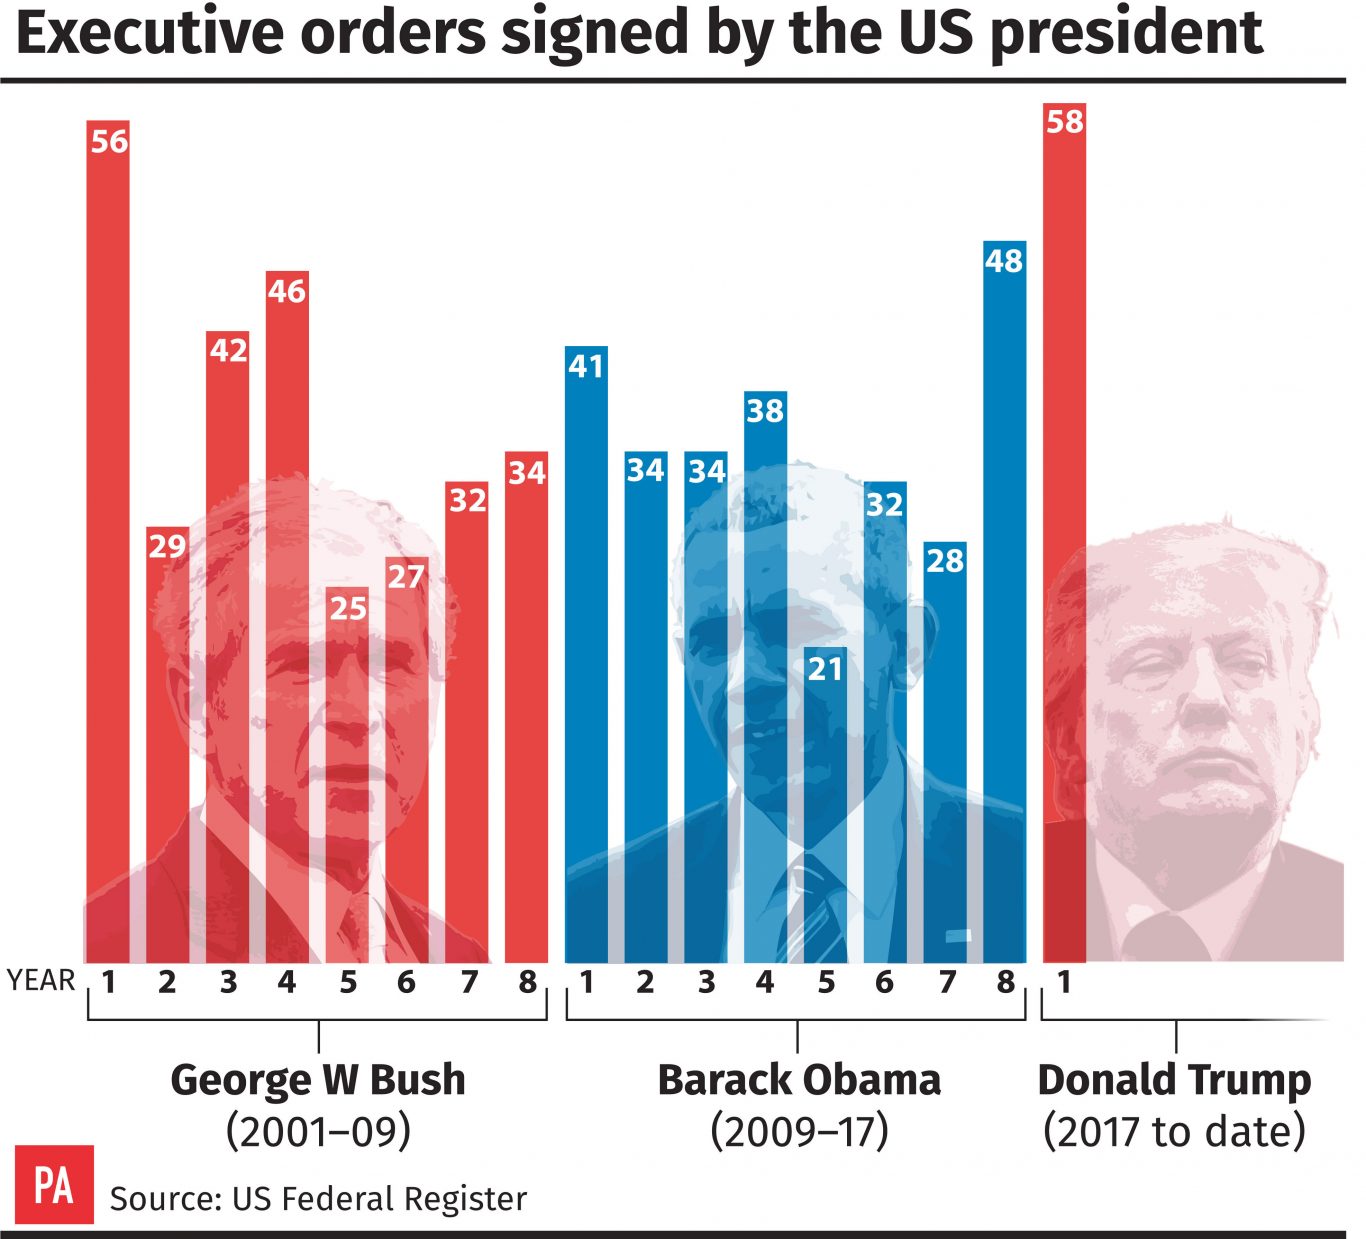 number of executive orders by president by 2017